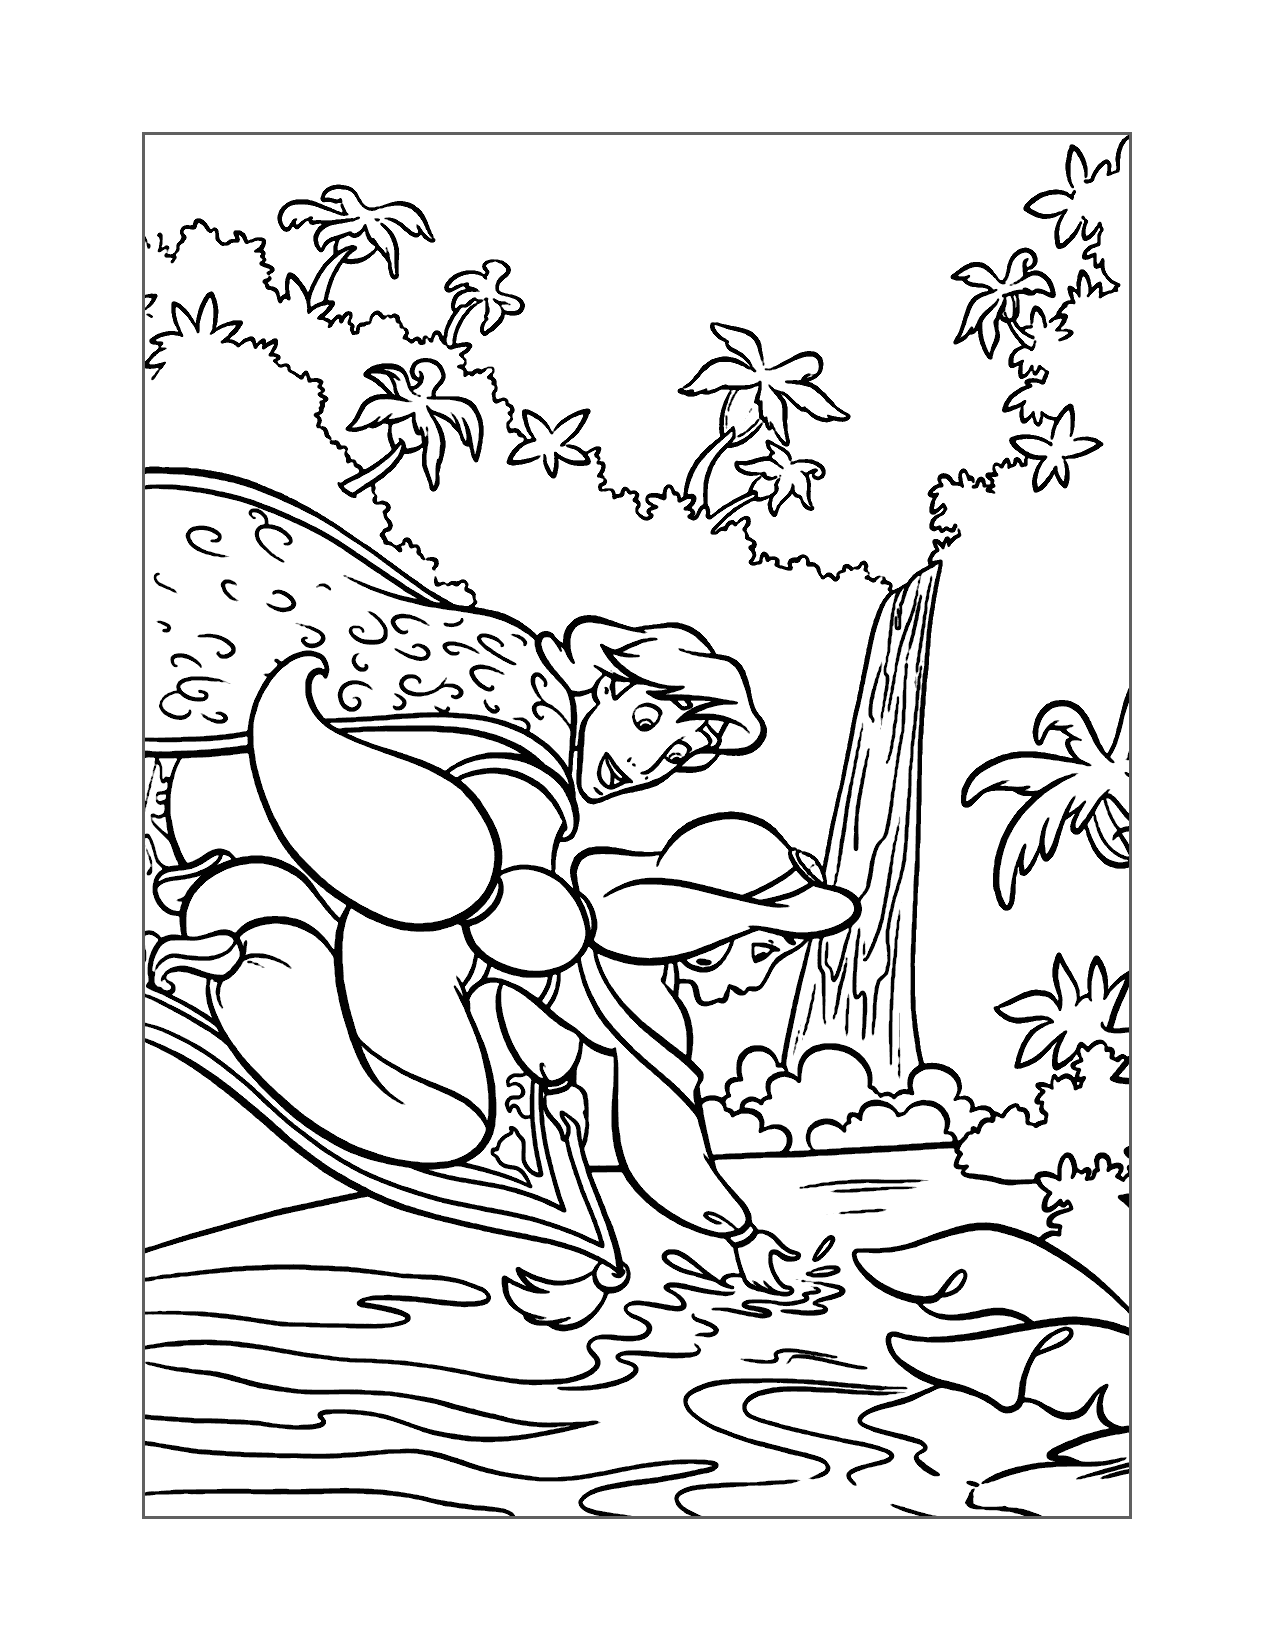 Aladdin And Jasmine Riding By Waterfall Coloring Page